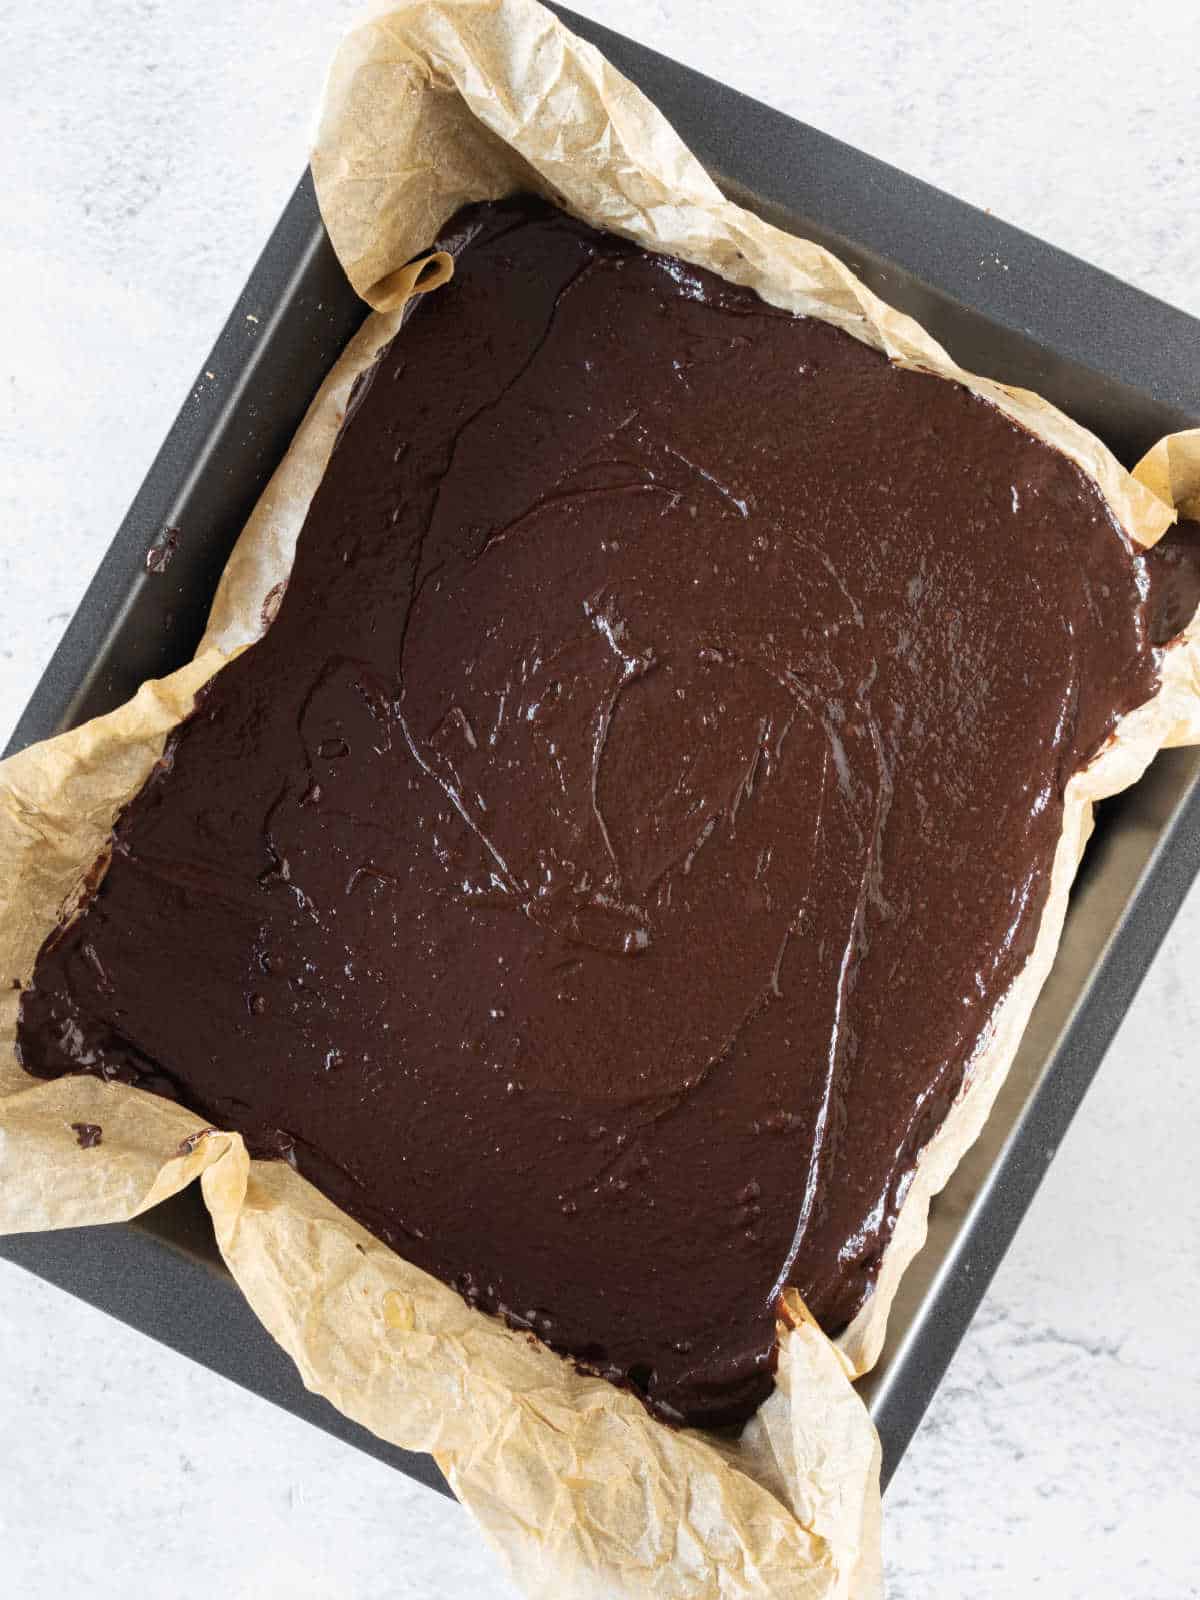 Chocolate layer on a metal square pan with parchment paper. Whitish surface.